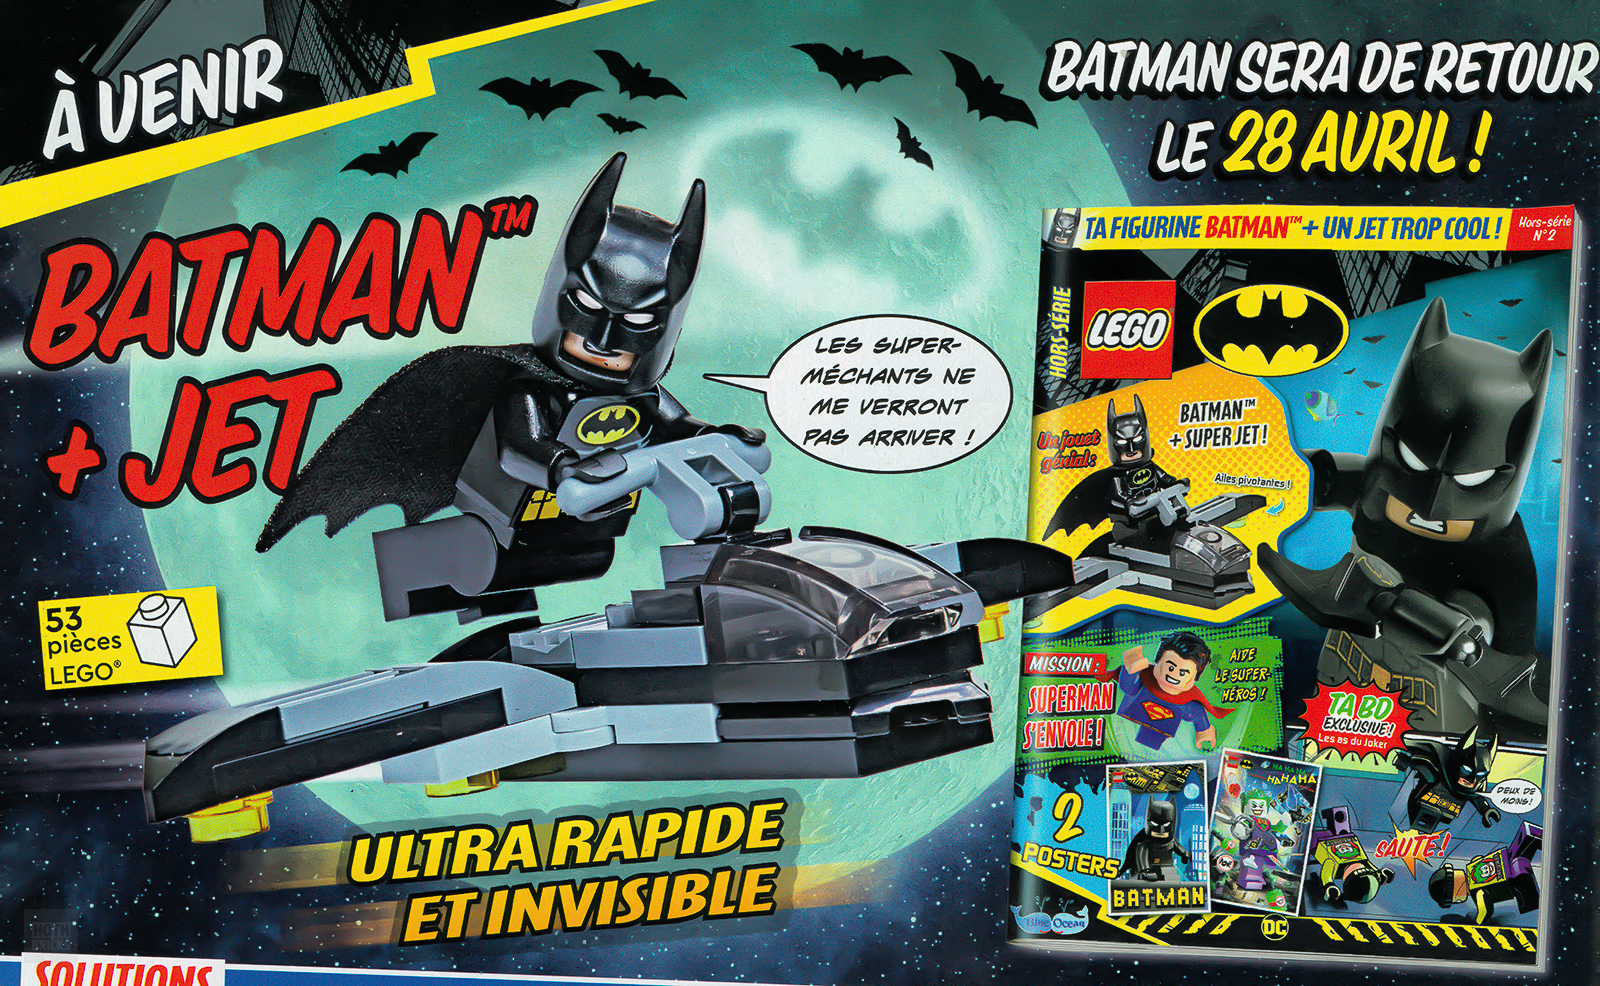 On newsstands: The March 2023 issue of the official LEGO Batman magazine